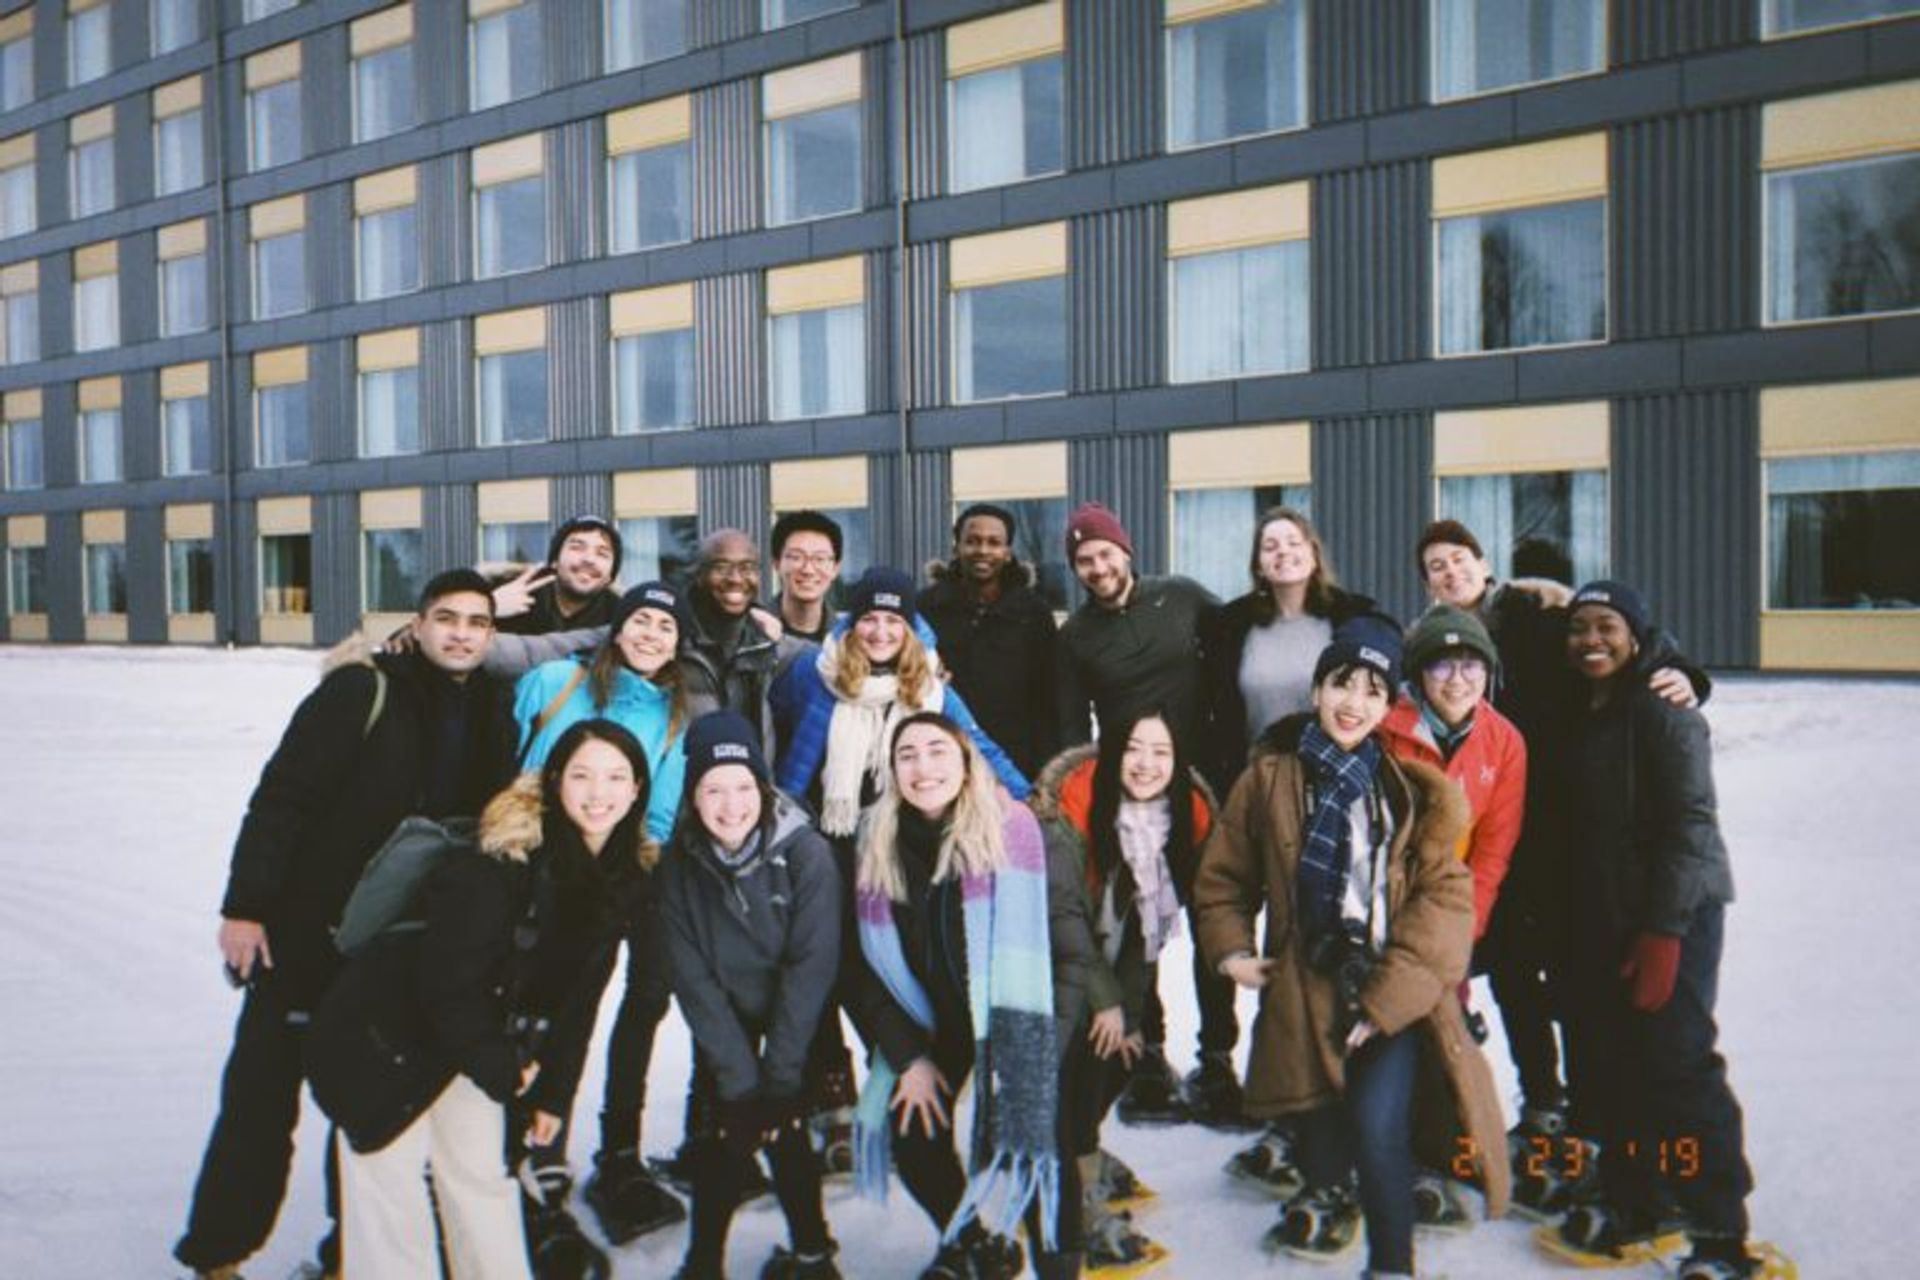 A large group of students pose in front of a hotel.